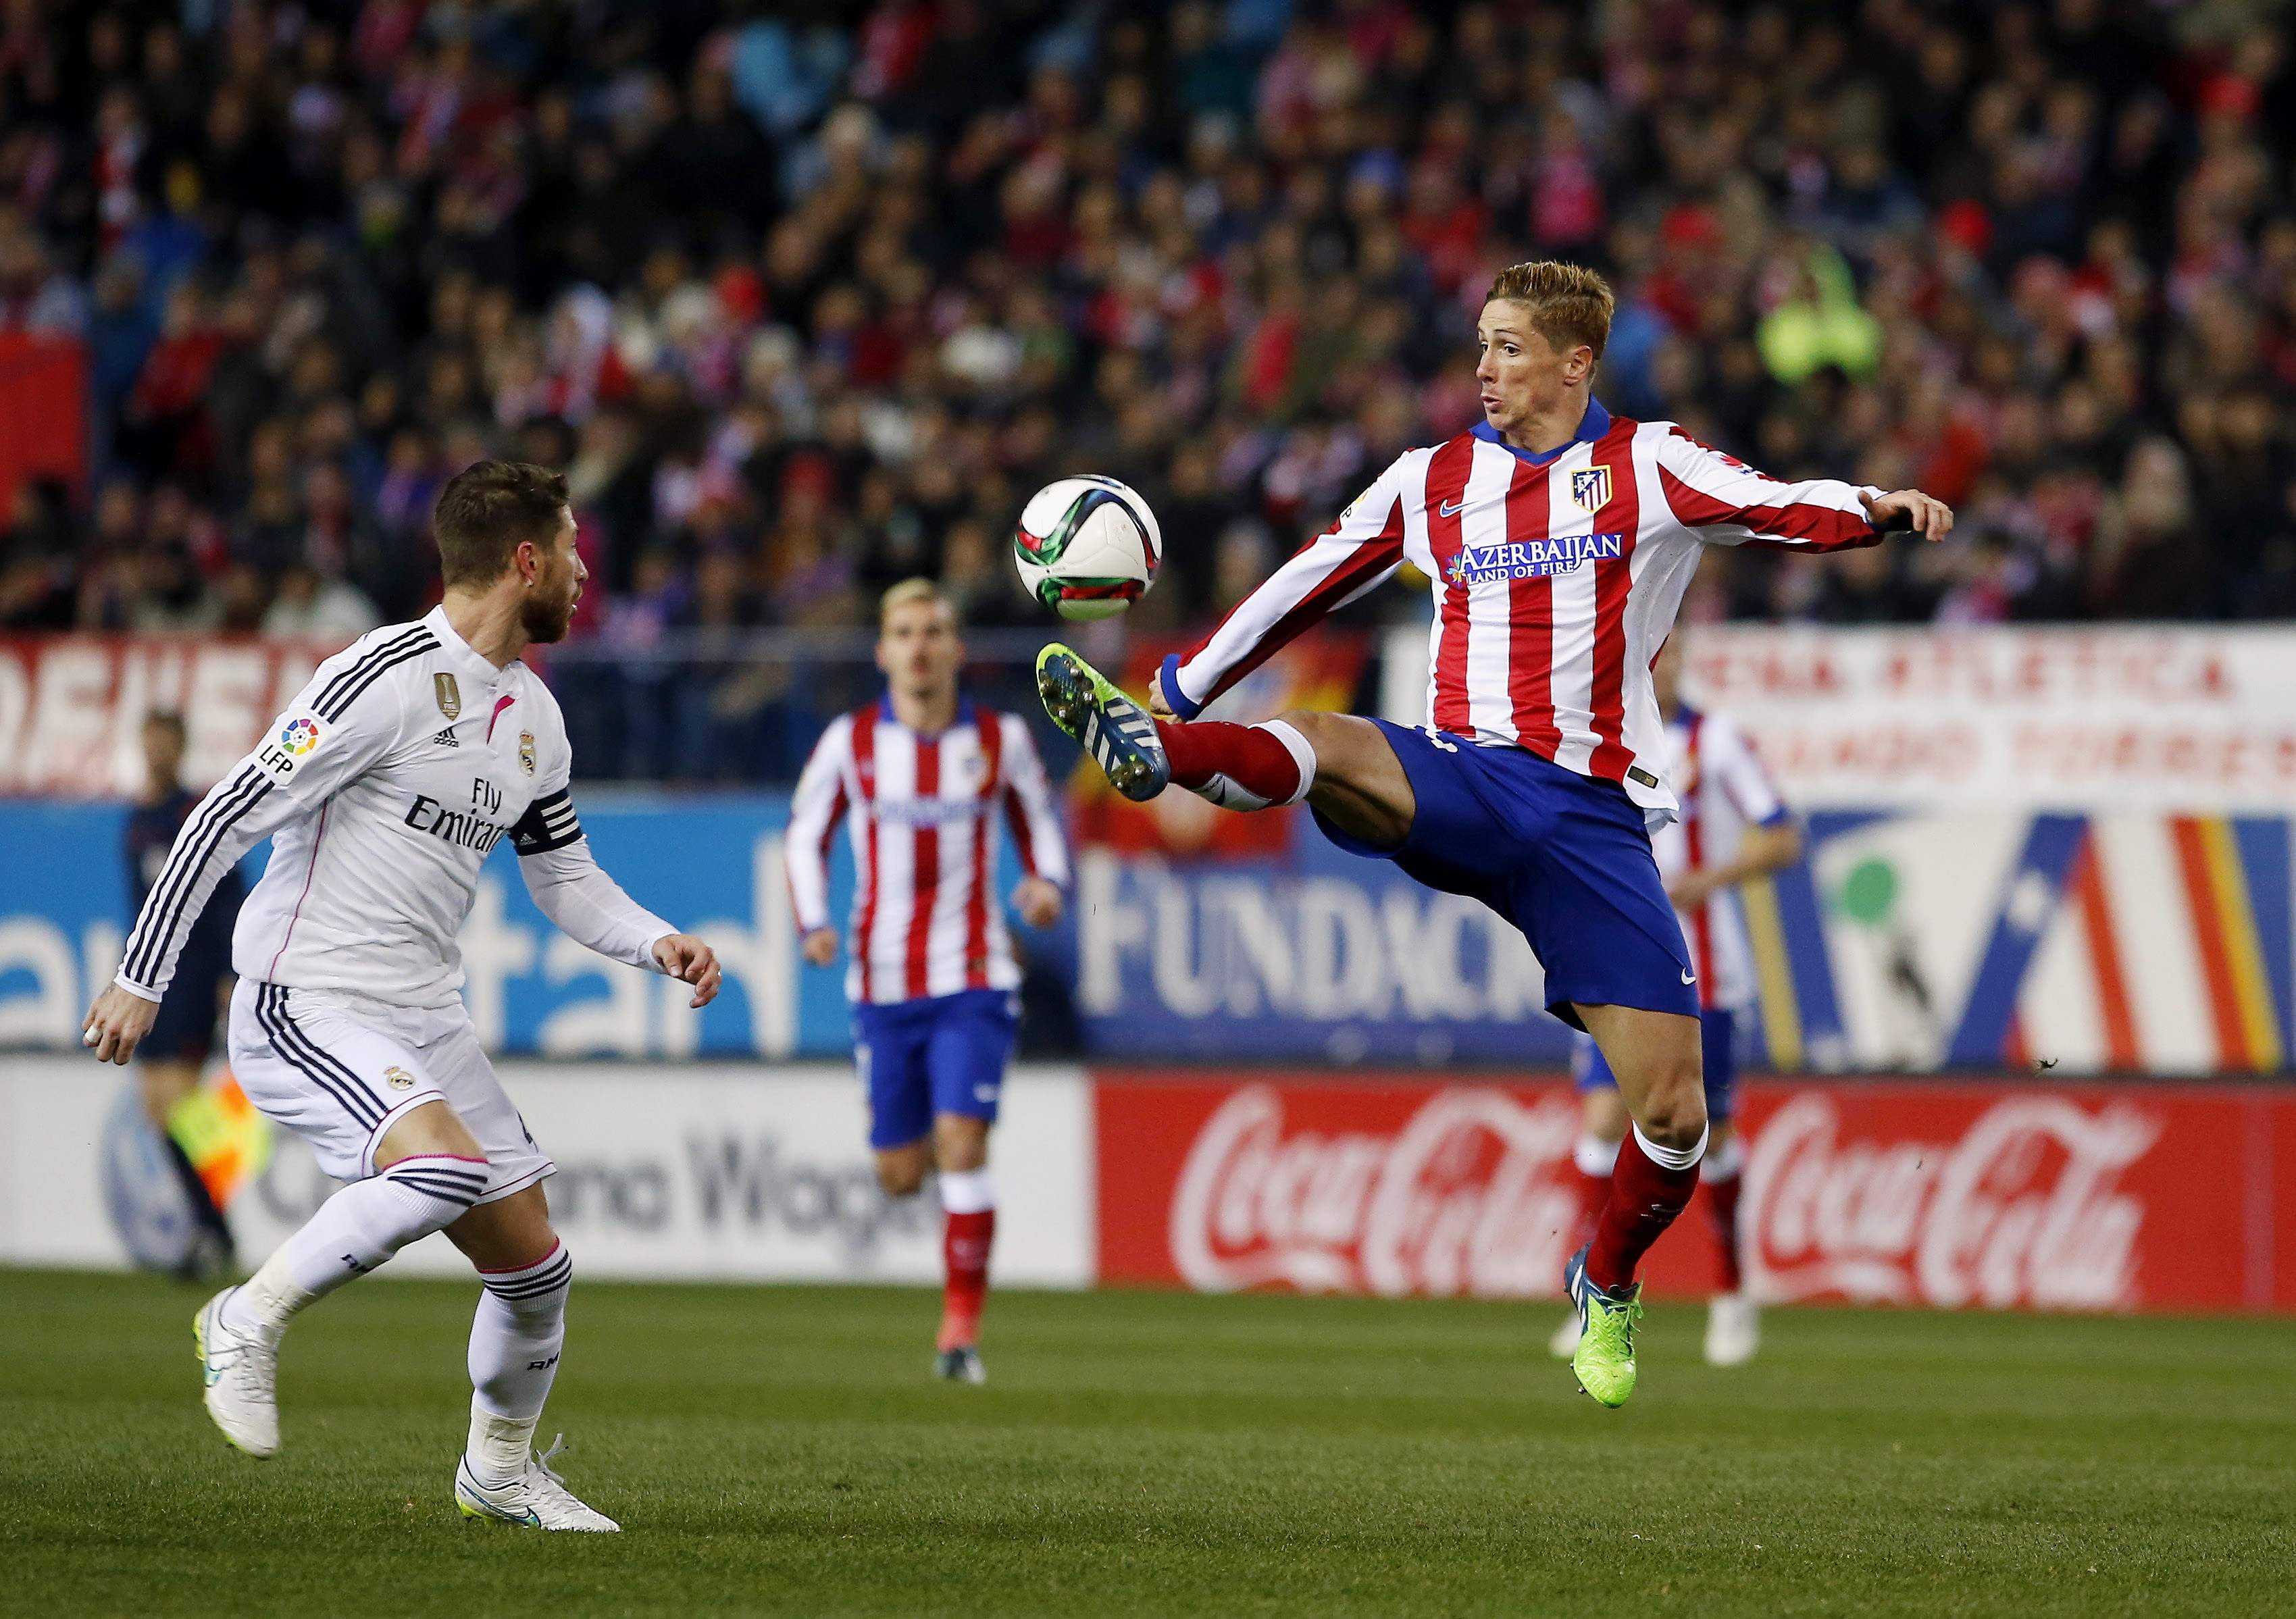 Torres subdued on return but Atletico sink Real